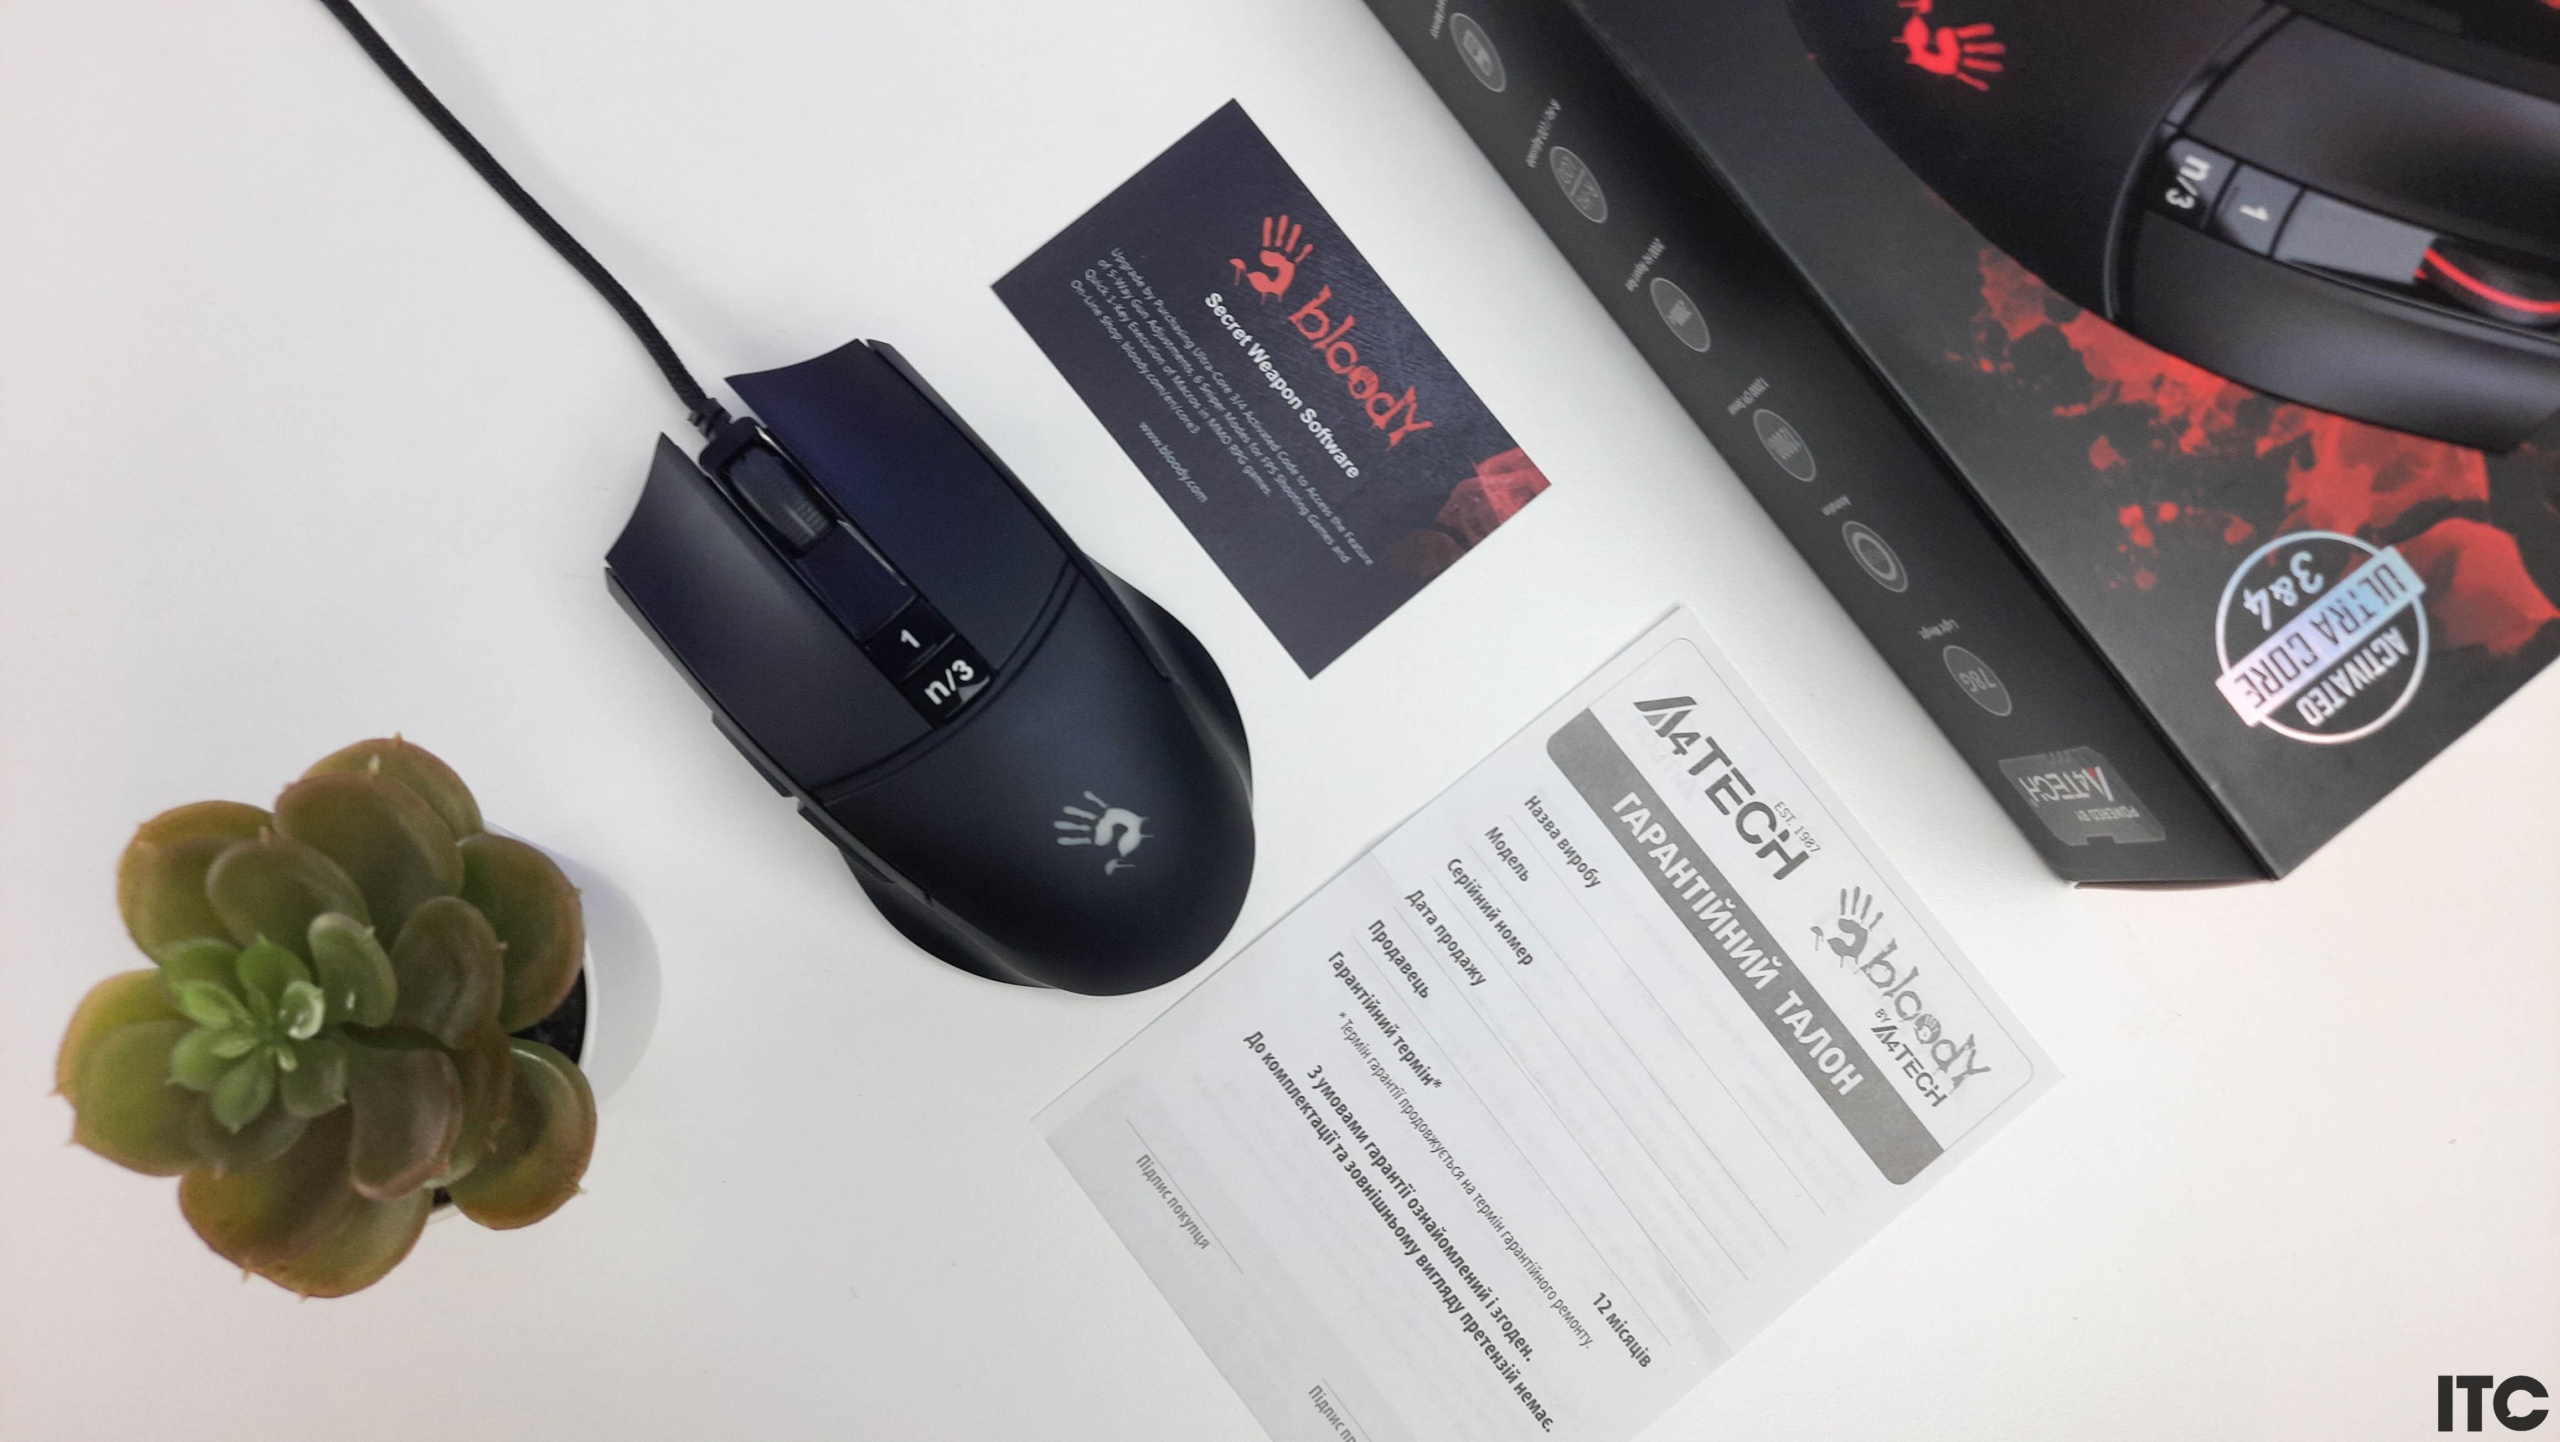 Disconnected eac blacklisted device bloody mouse a4tech rust решение фото 33